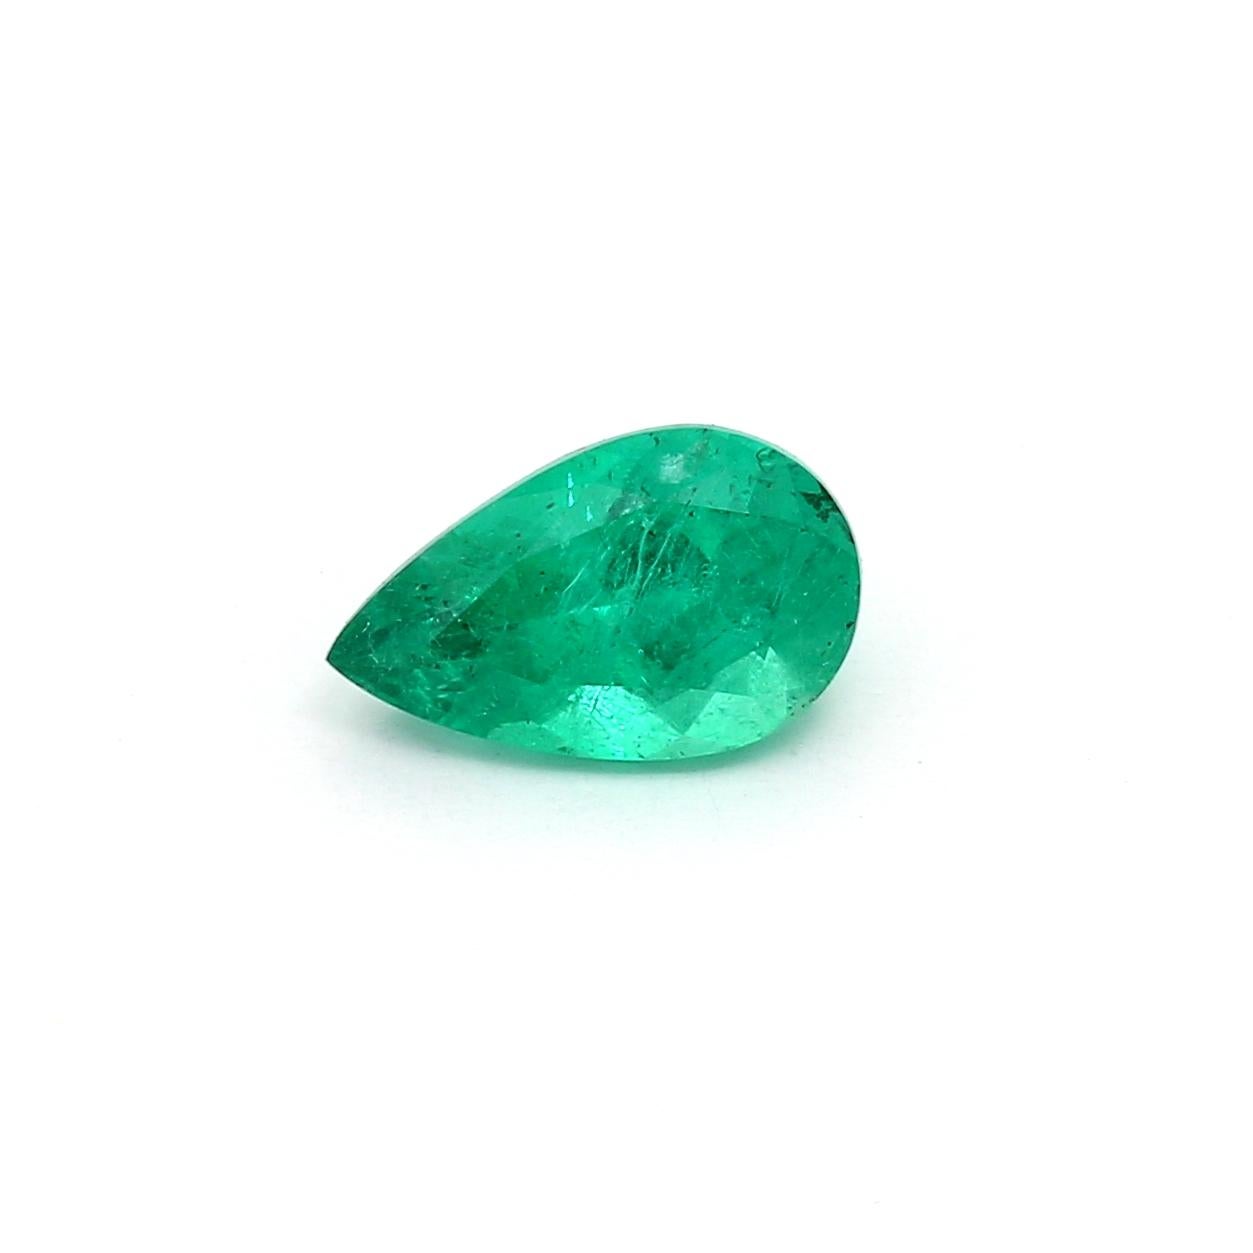 An amazing Russian Emerald which allows jewelers to create a unique piece of wearable art.
This exceptional quality gemstone would make a custom-made jewelry design. Perfect for a Ring or Pendant.

Shape - Pear
Weight - 1.26 ct
Treatment -